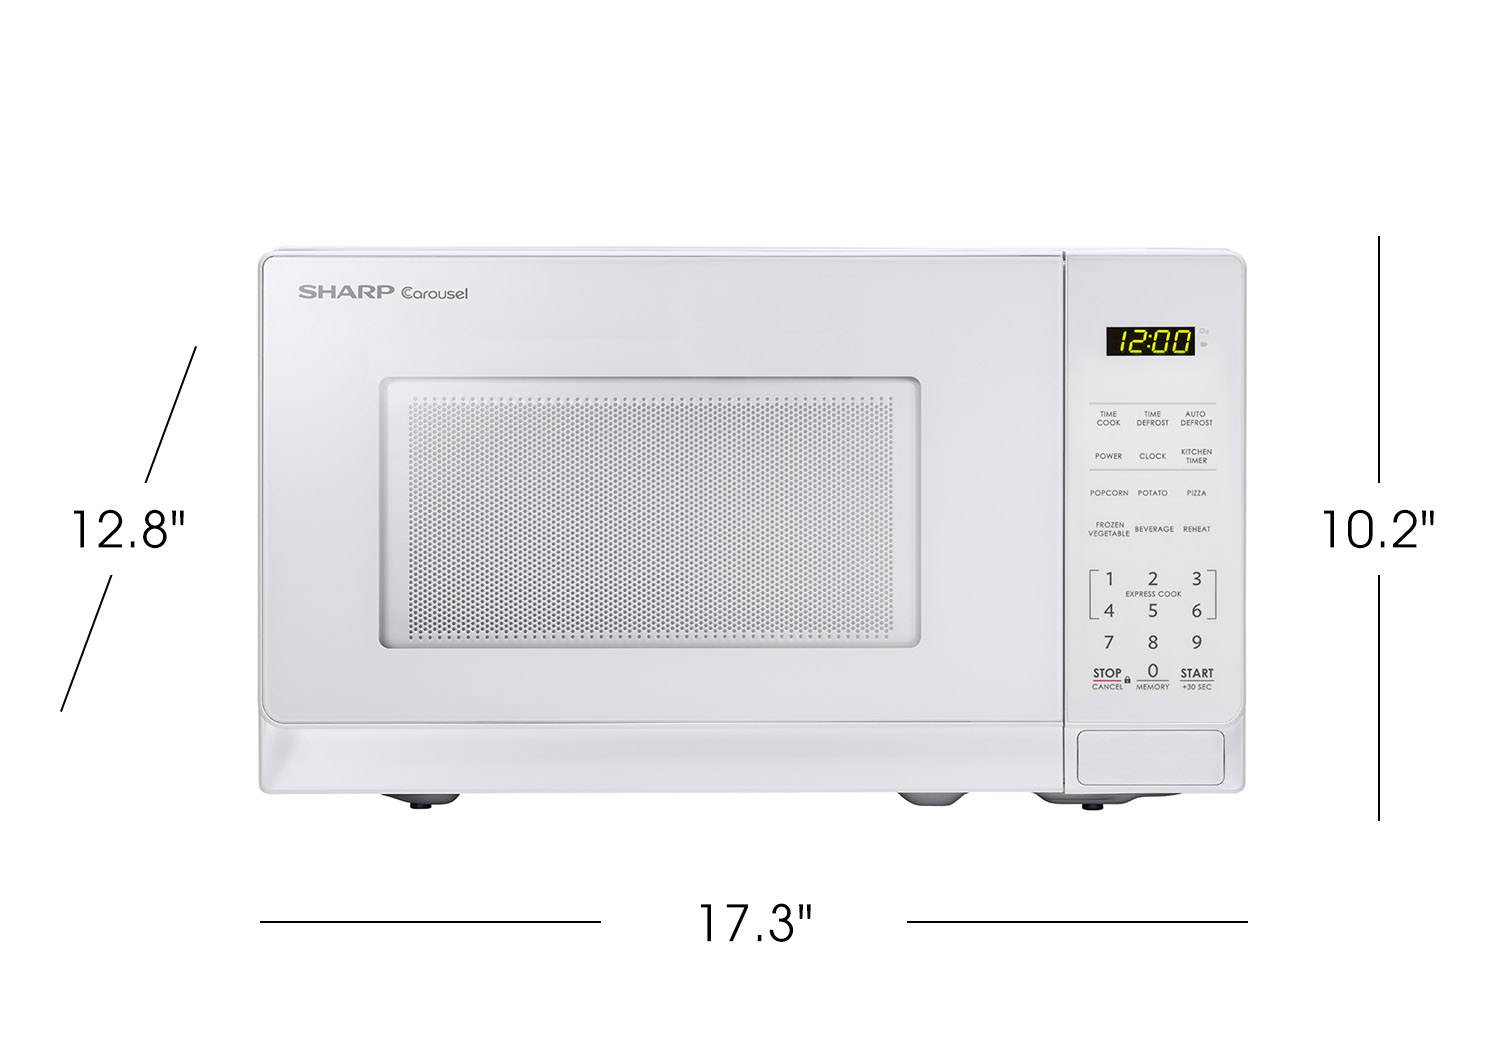 SMC0711BS 0.7 Cu Ft Stainless Steel Carousel Microwave